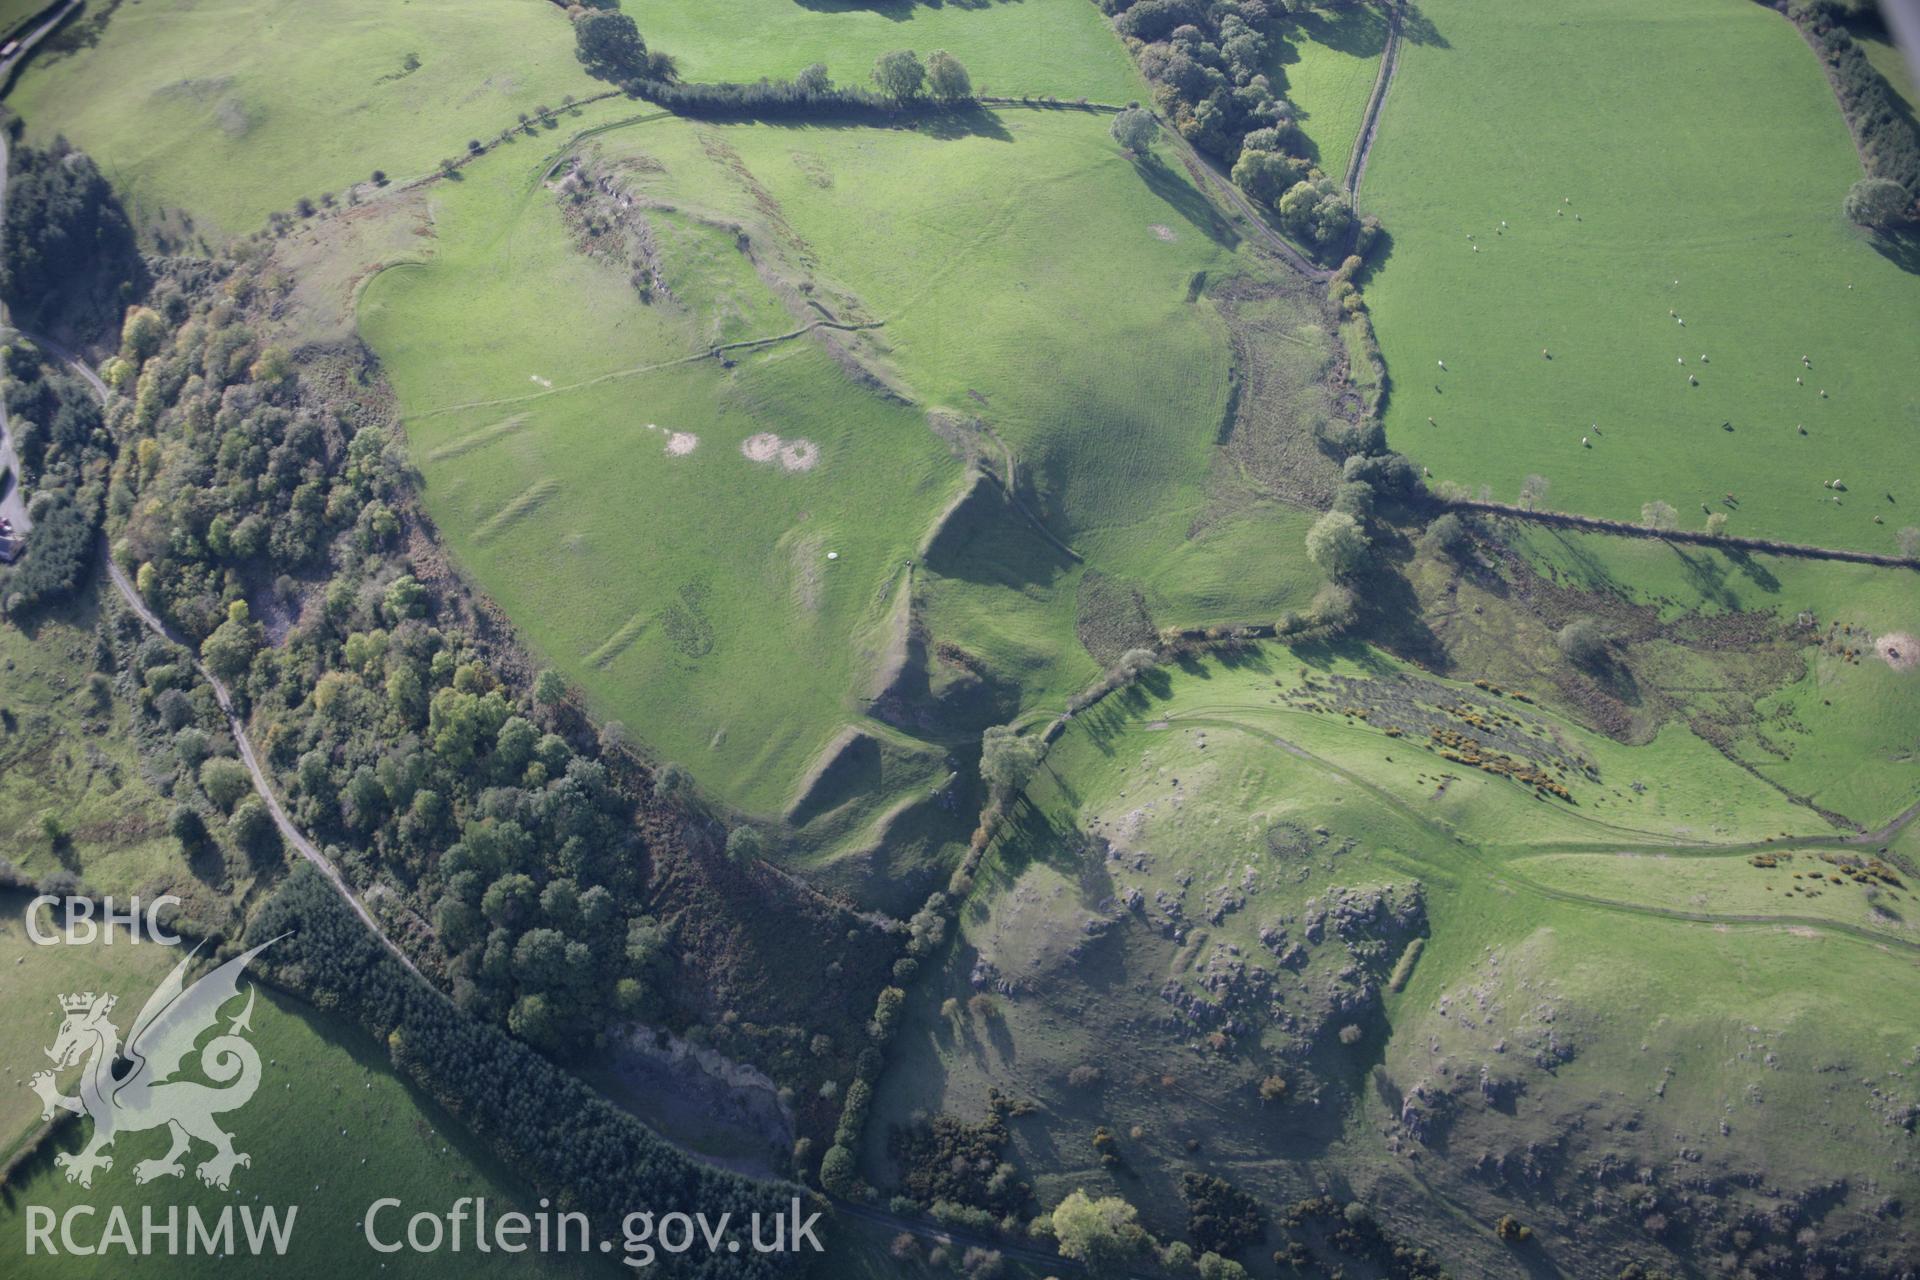 RCAHMW colour oblique aerial photograph of Graig Fawr Camp from the north-east with pillow mounds visible. Taken on 13 October 2005 by Toby Driver